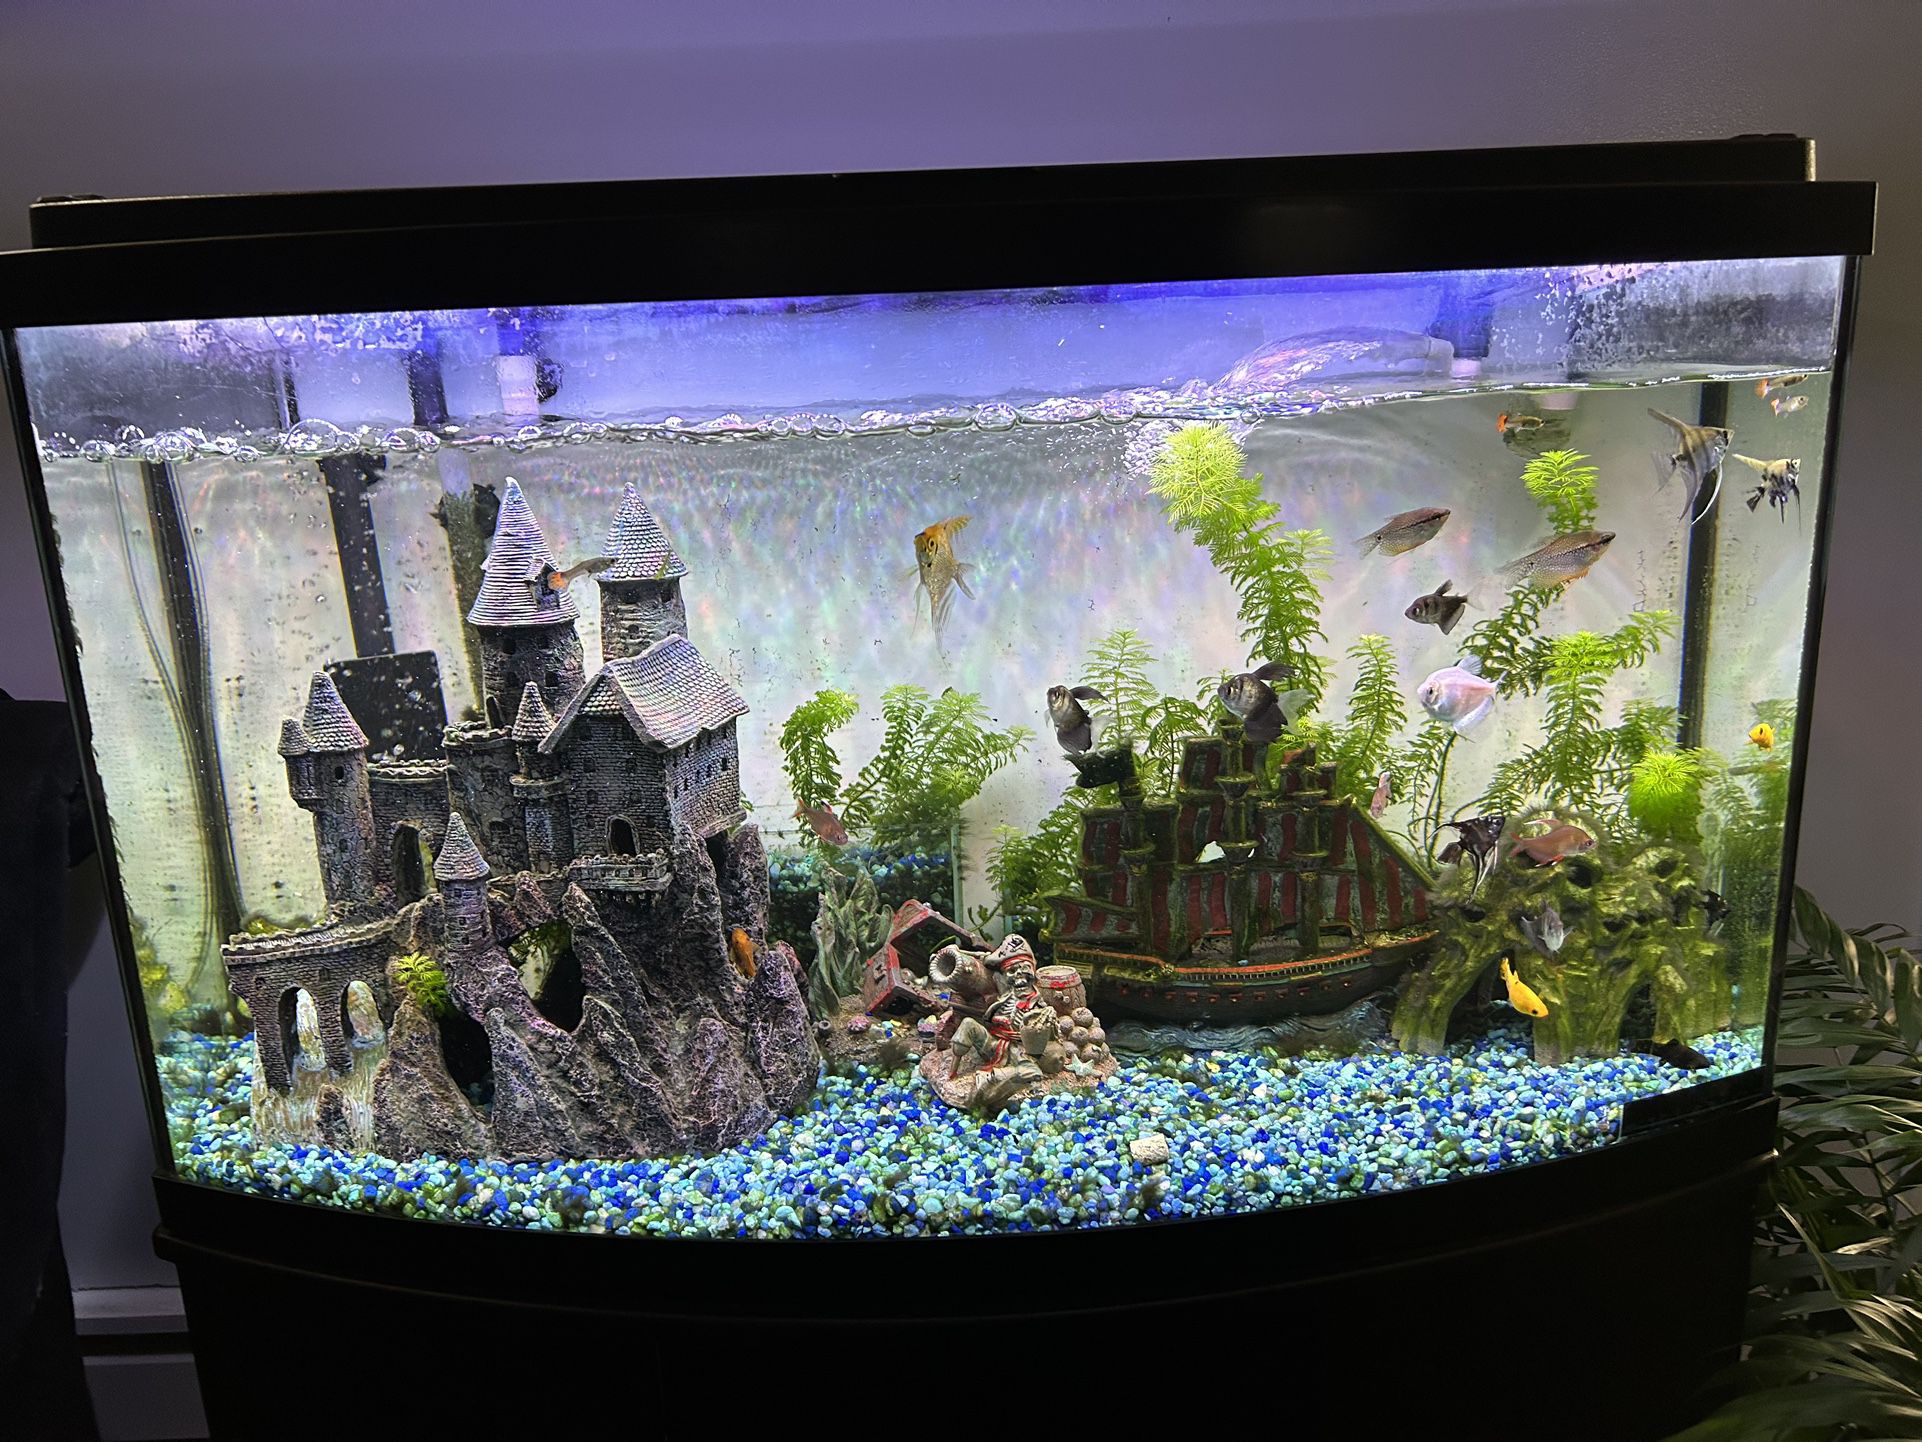 60 Gallons Fish Tank In